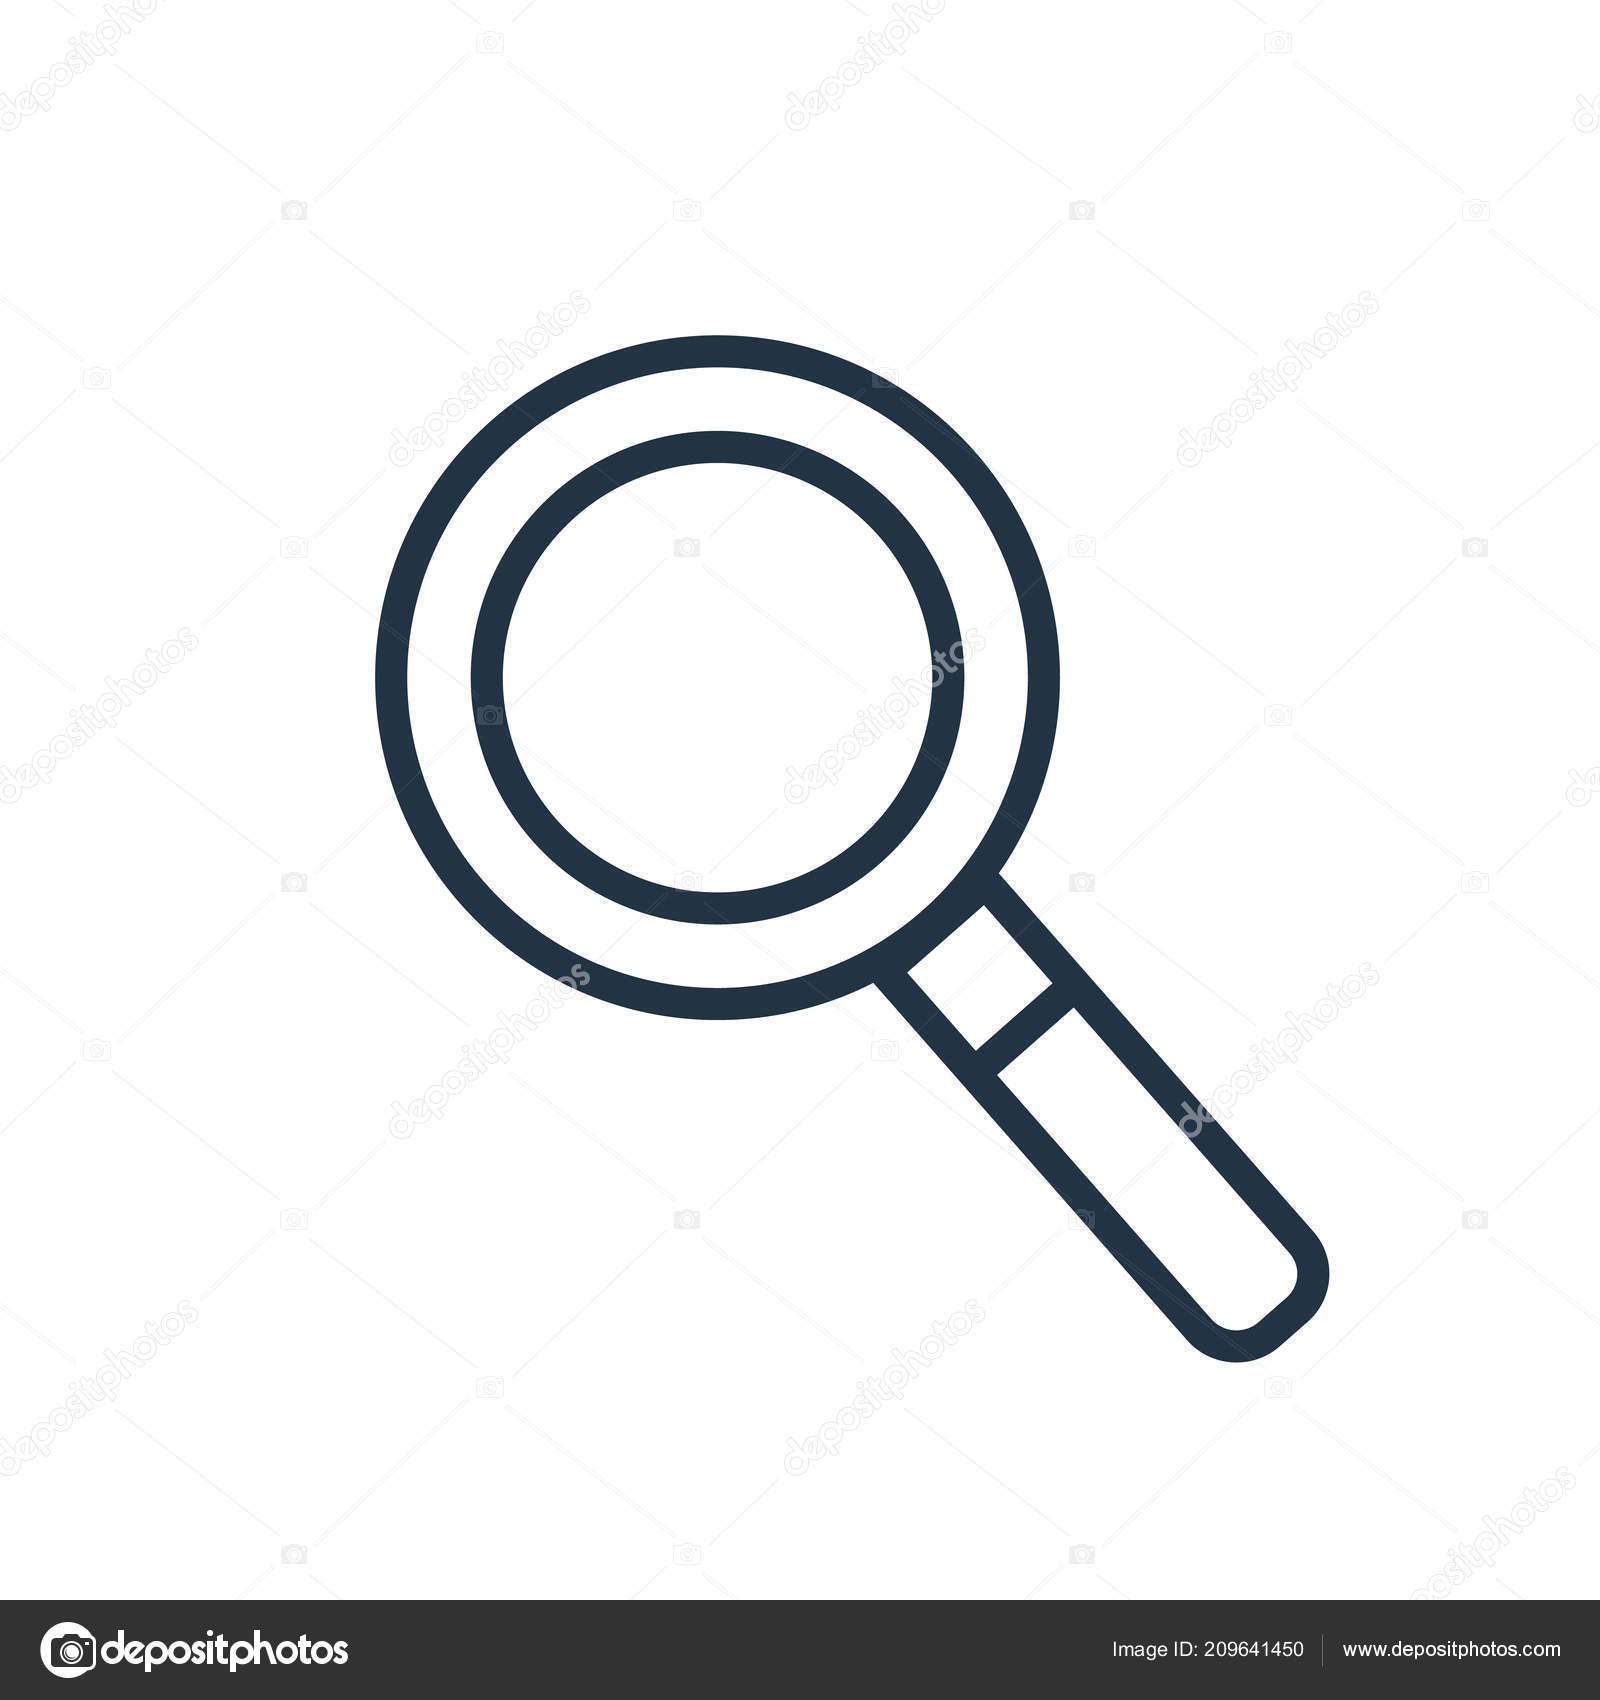 398 Uses A Magnifying Glass Illustrations - Free in SVG, PNG, EPS